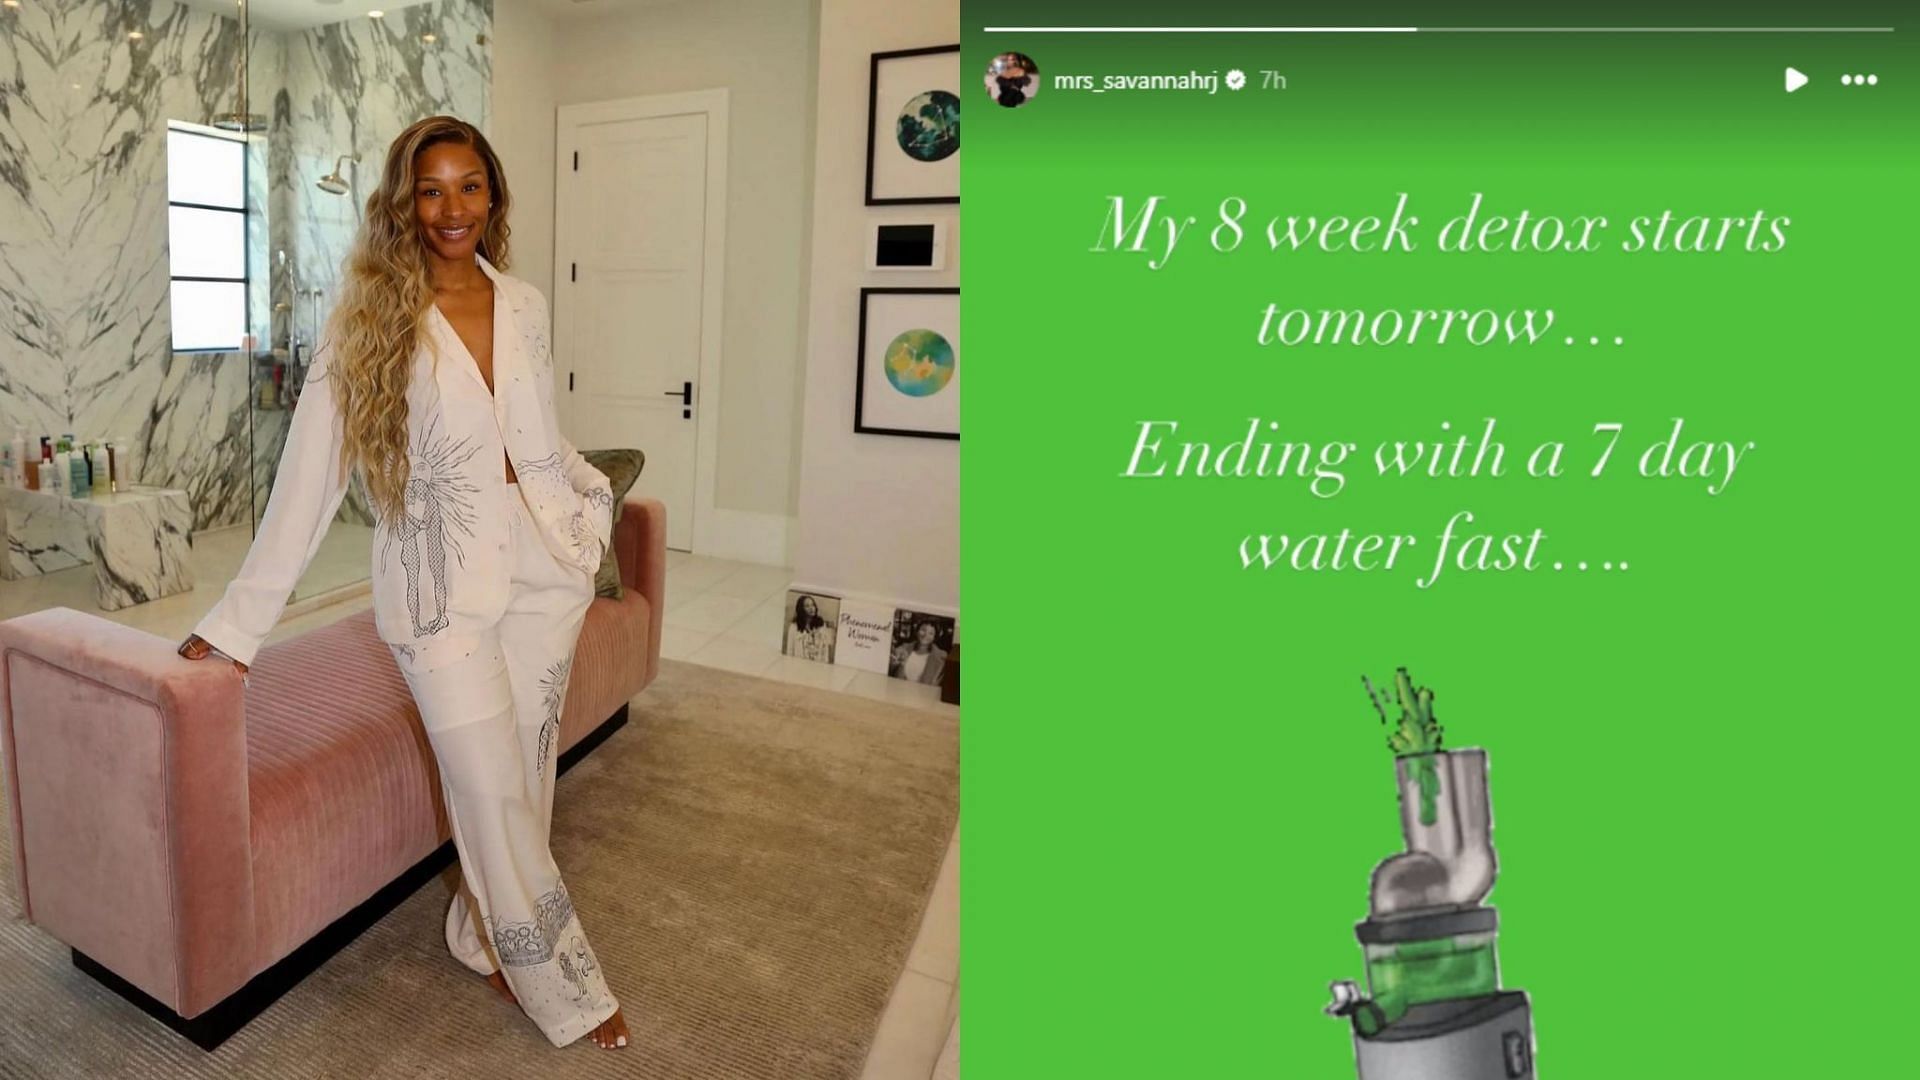 Savannah James announces going on a detox in an Instagram Story